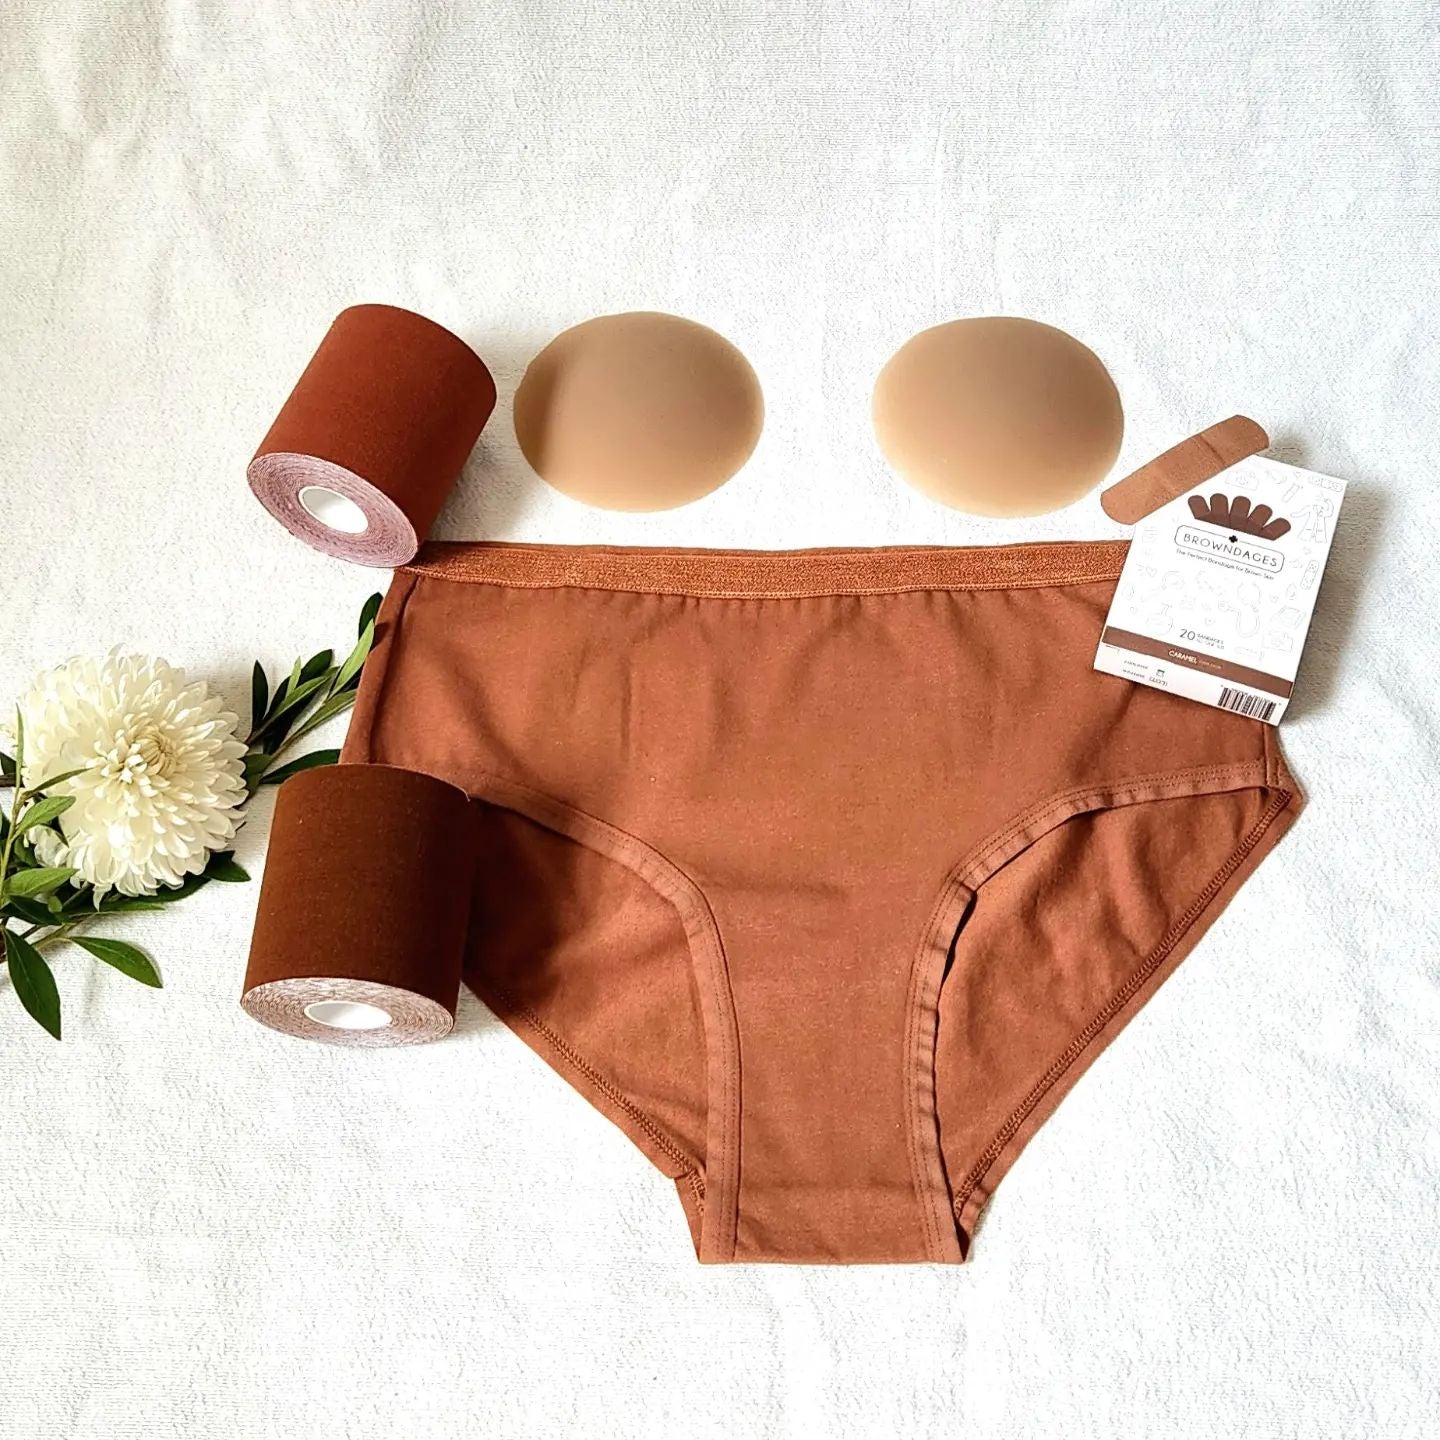 A bundle deal including a pair of medium brown women's underwear with skin tone matching nipple covers, two rolls of boob tape, and band-aids laying on a white background with a flower. Shop for your skin tone in 15 minutes or less.